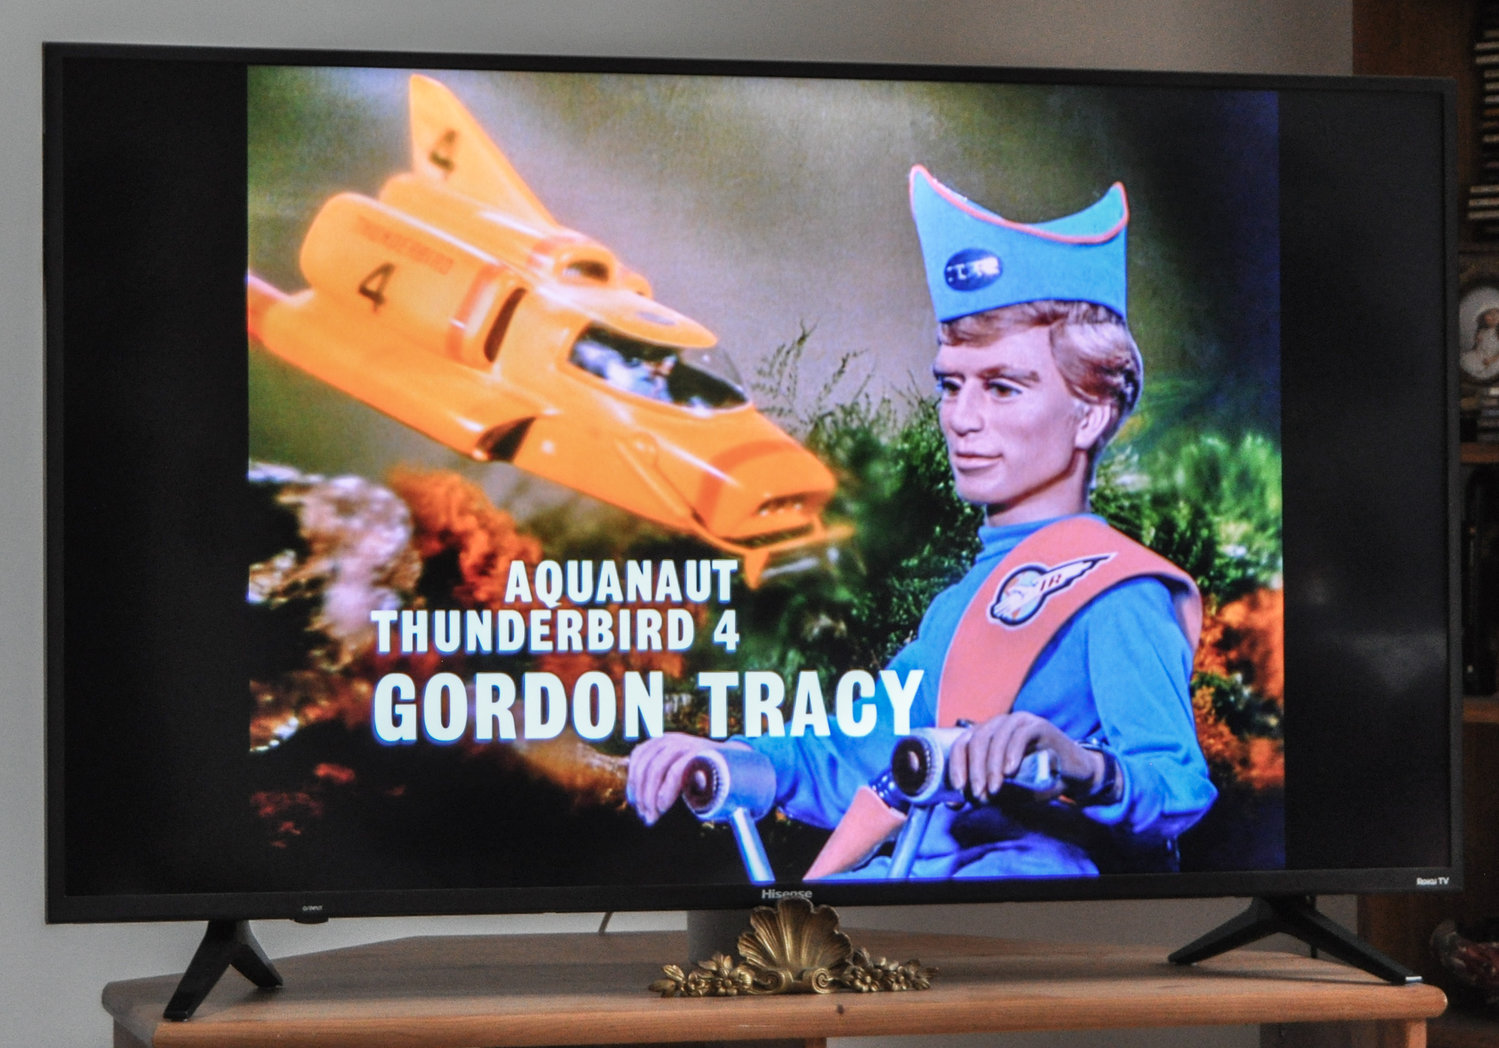 “Supermarionation” stars like Lady Penelope and Gordon Tracy populated the TV screen during the sixties, influencing a generation of kids. Thankfully, these days, I’ve got no strings on me.